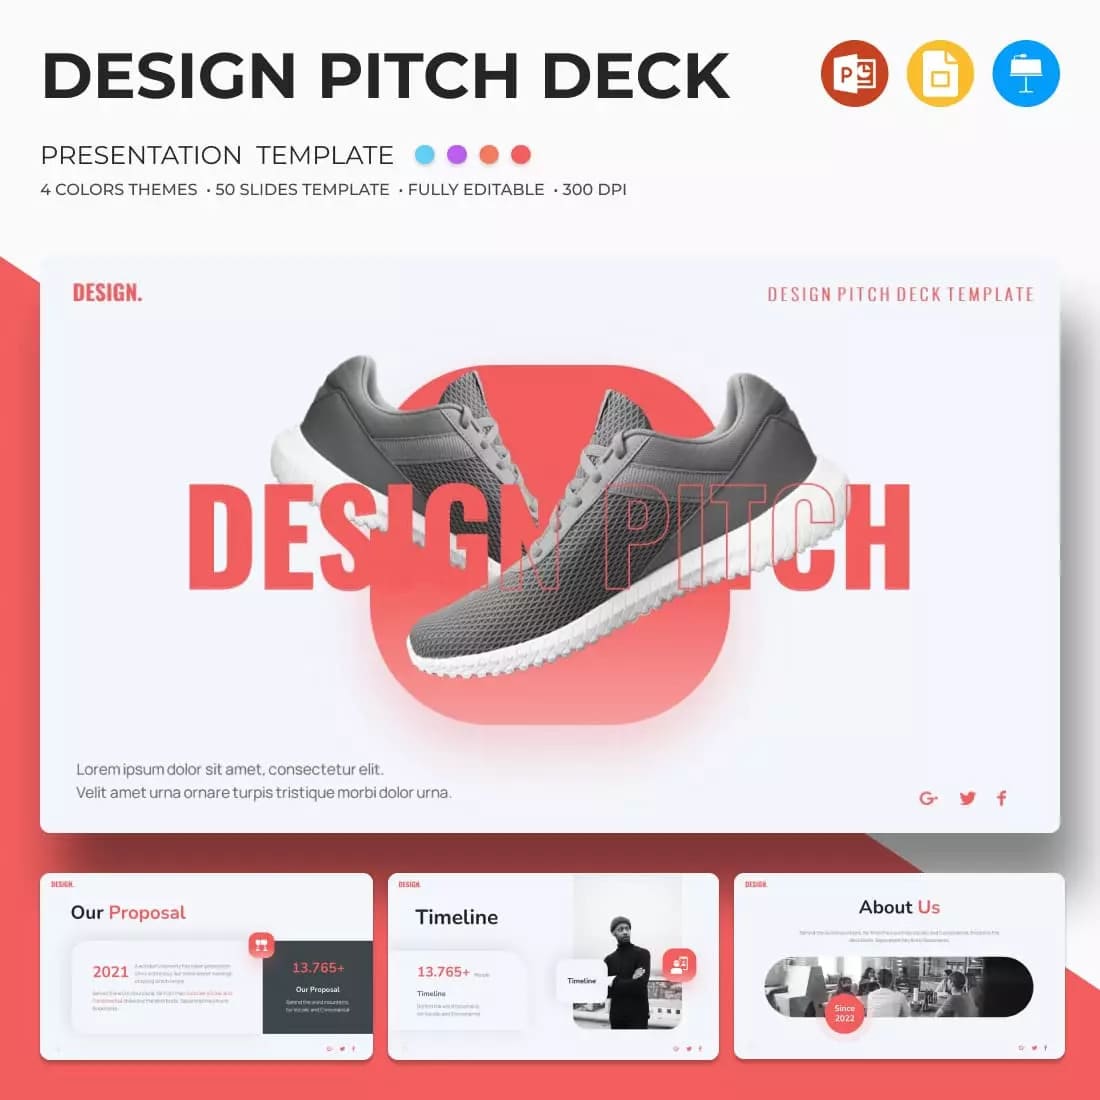 Design Pitch Deck Presentation Template Preview image.